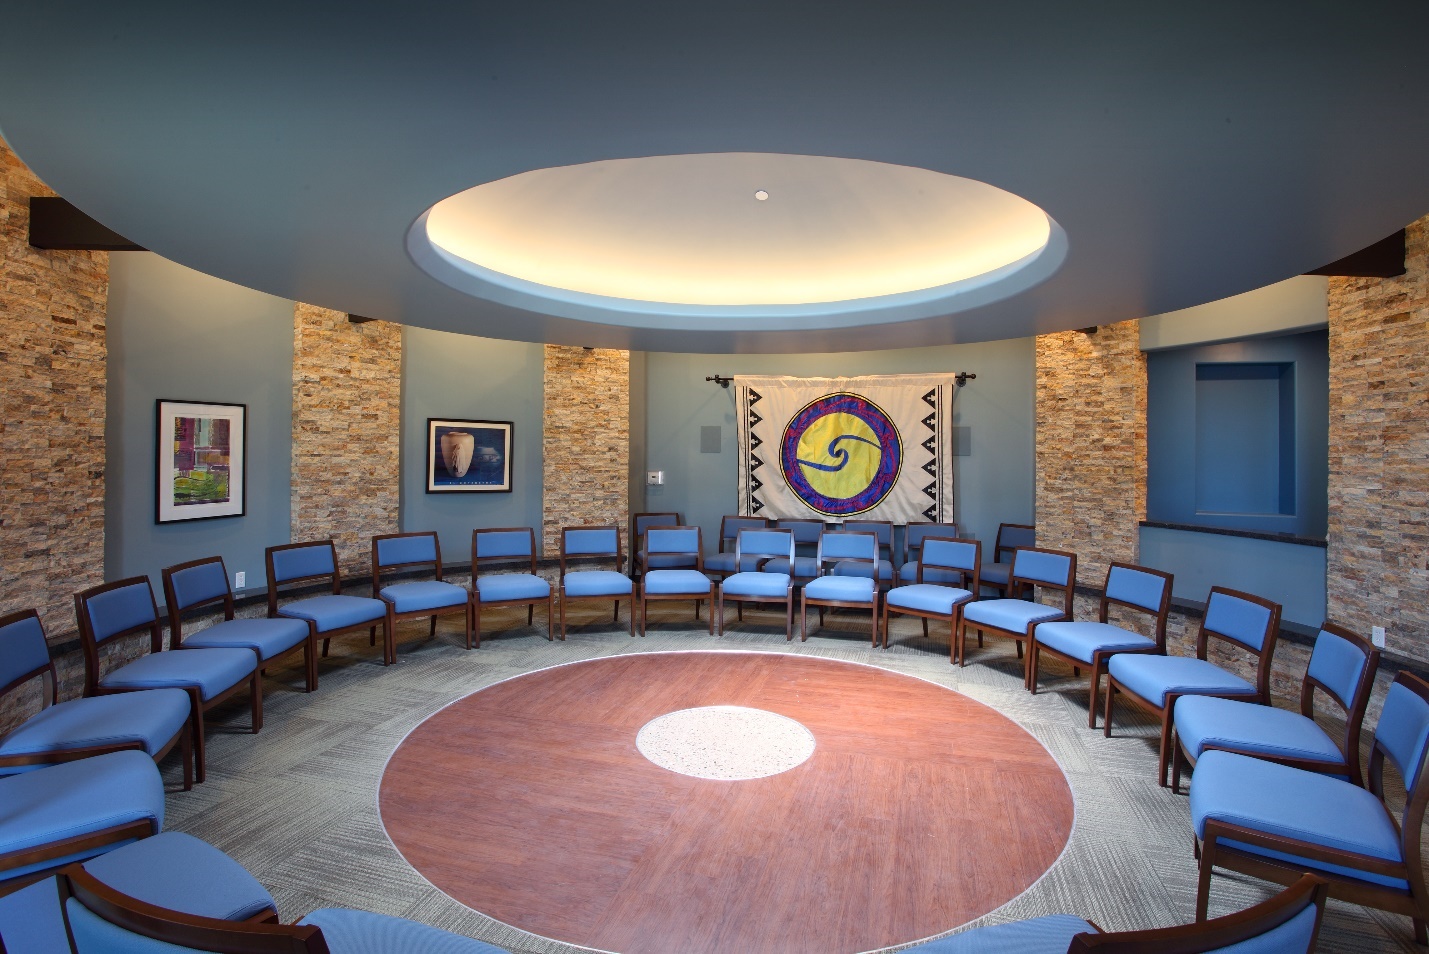 Photograph of the talking circle room at the Patina Wellness Center that has several chairs arranged in a circle with a skylight and Native American art.